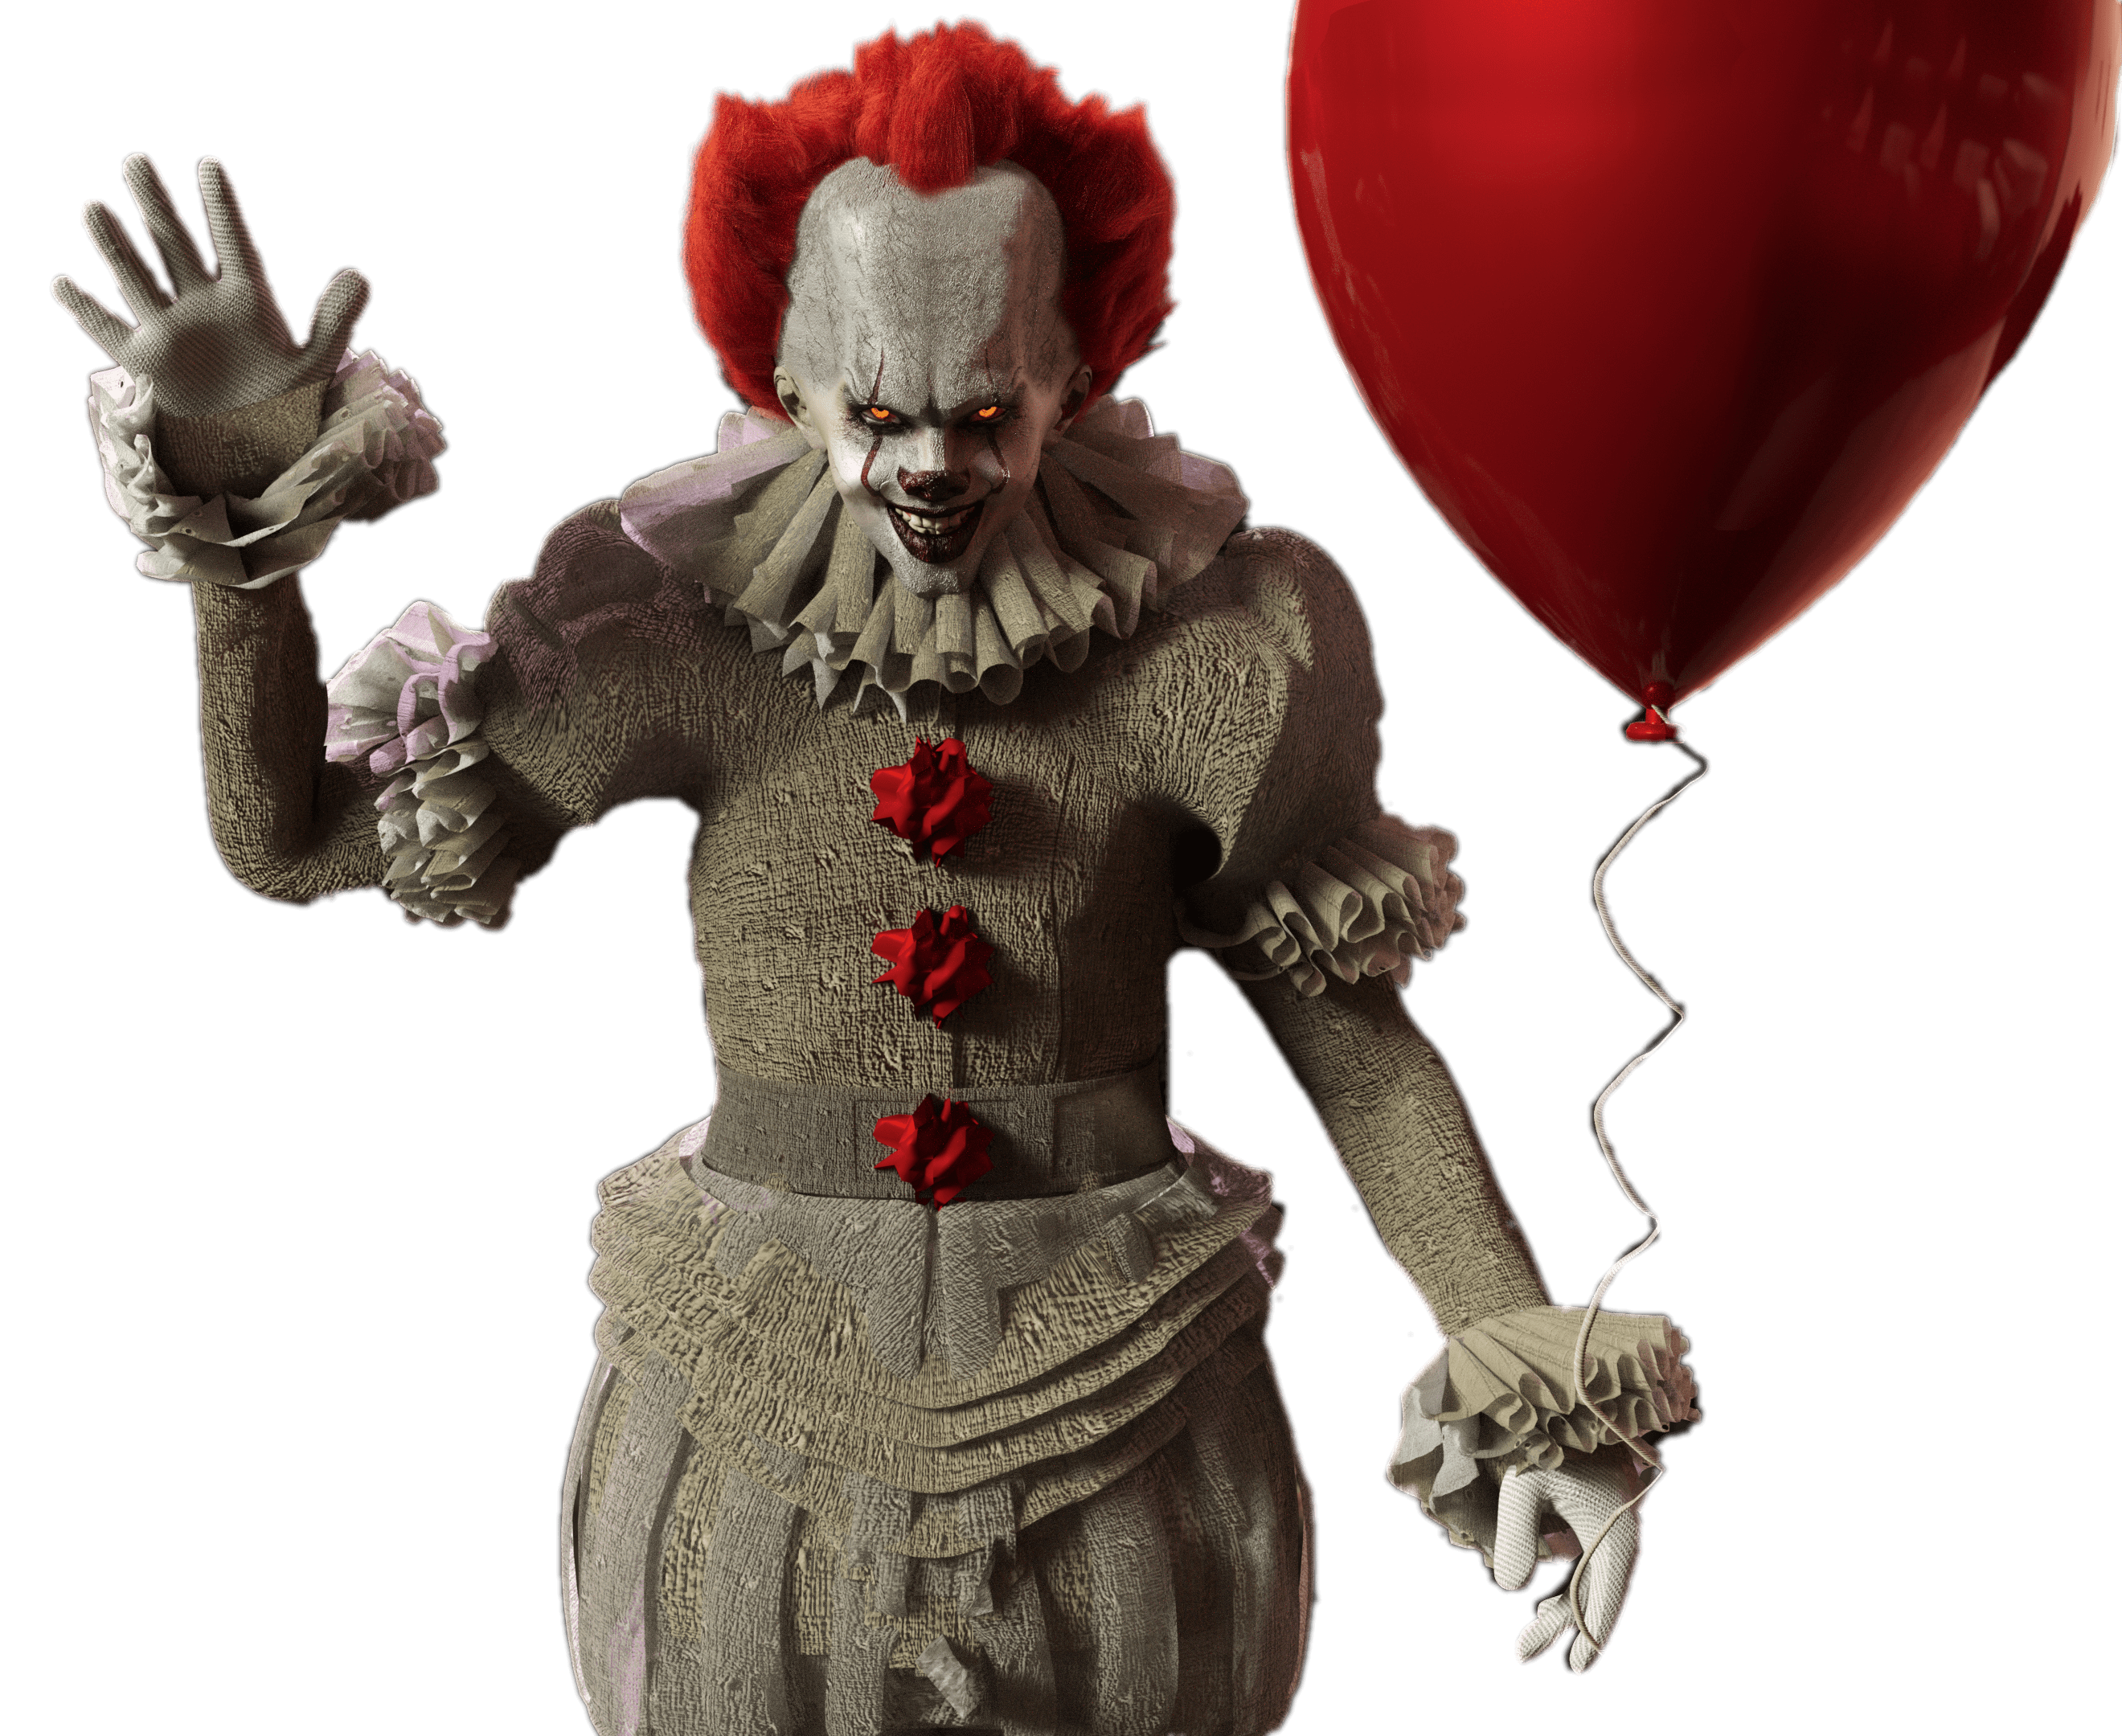 balloons clipart pennywise